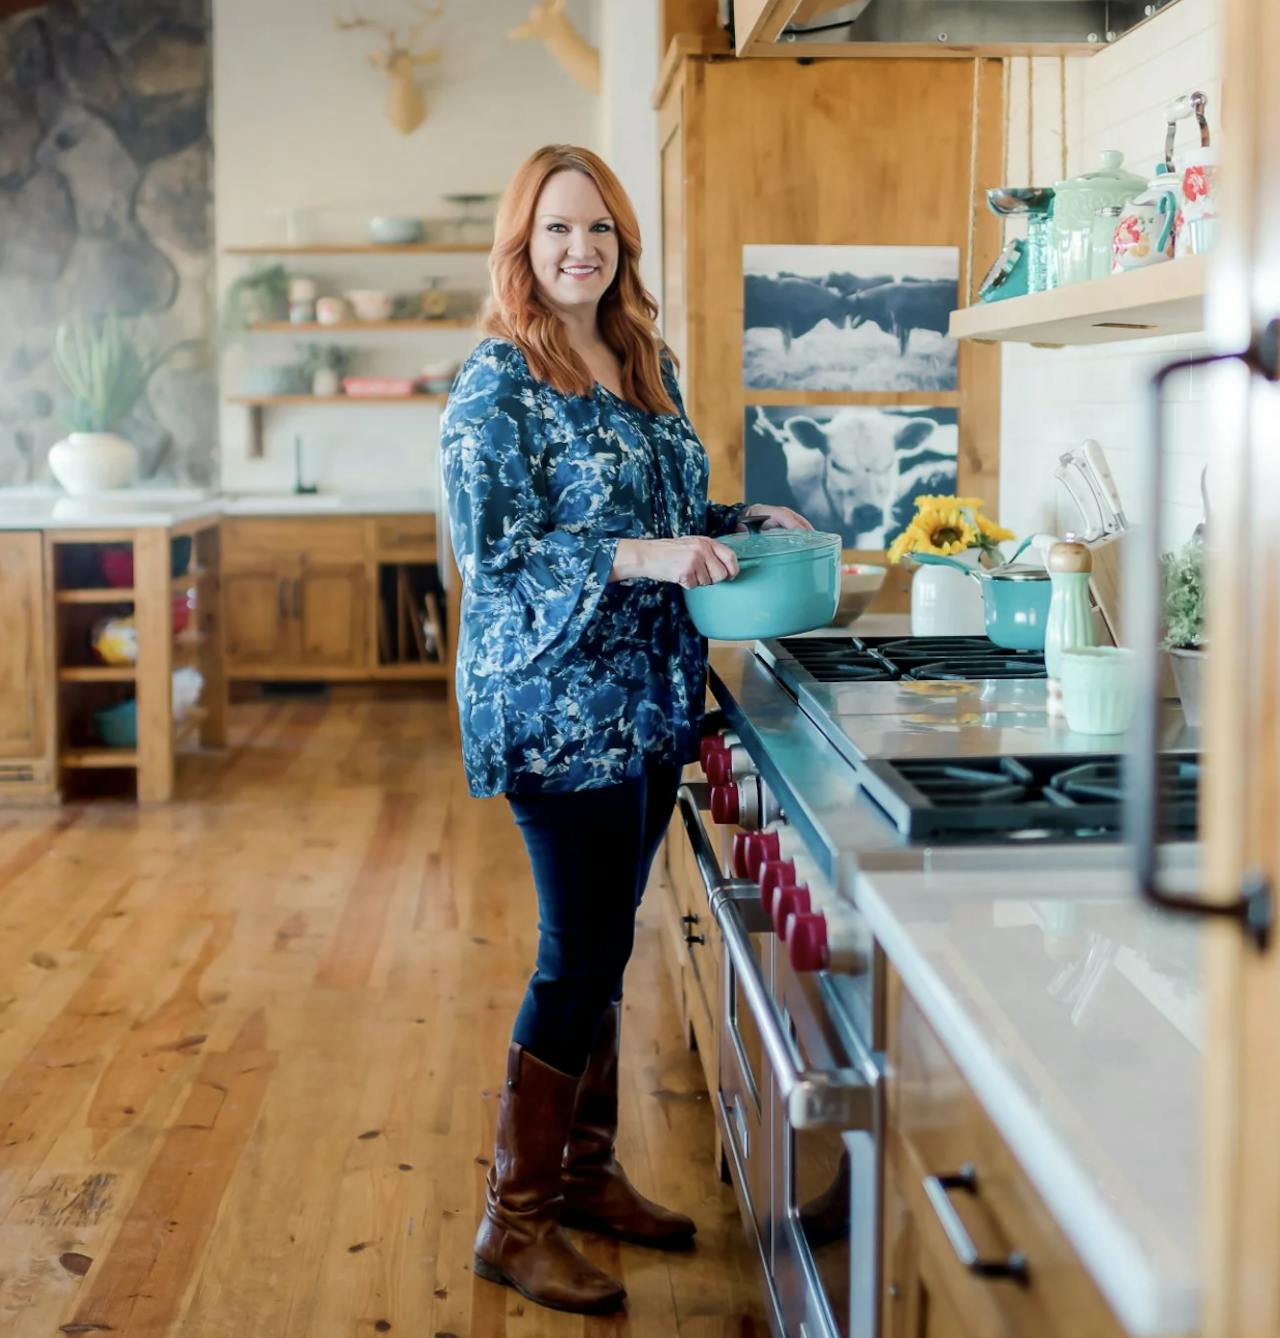 Ree Drummond Just Launched The Pioneer Woman Outdoor Collection at Walmart